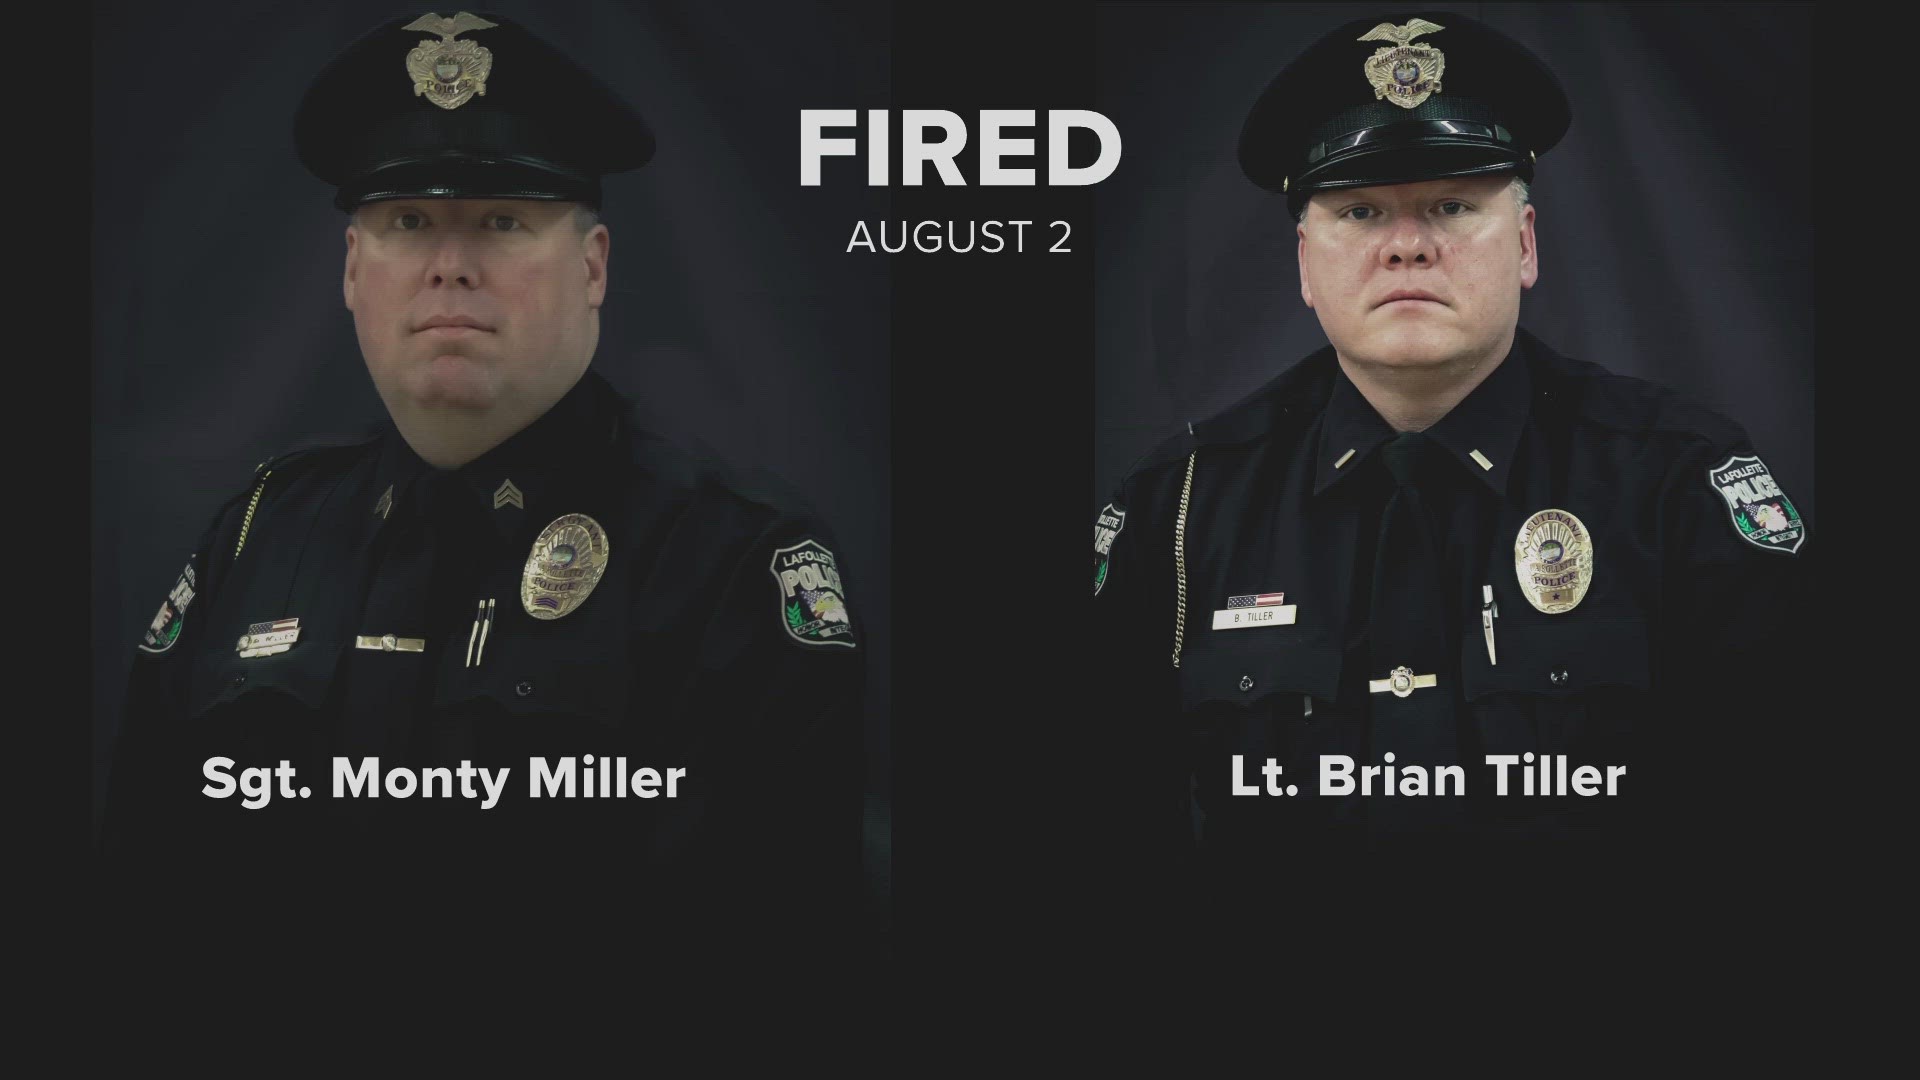 The LaFollette City Council fired Lt. Brian Tiller and Sgt. Monty Miller in August 2022. They filed a federal lawsuit on Wednesday.